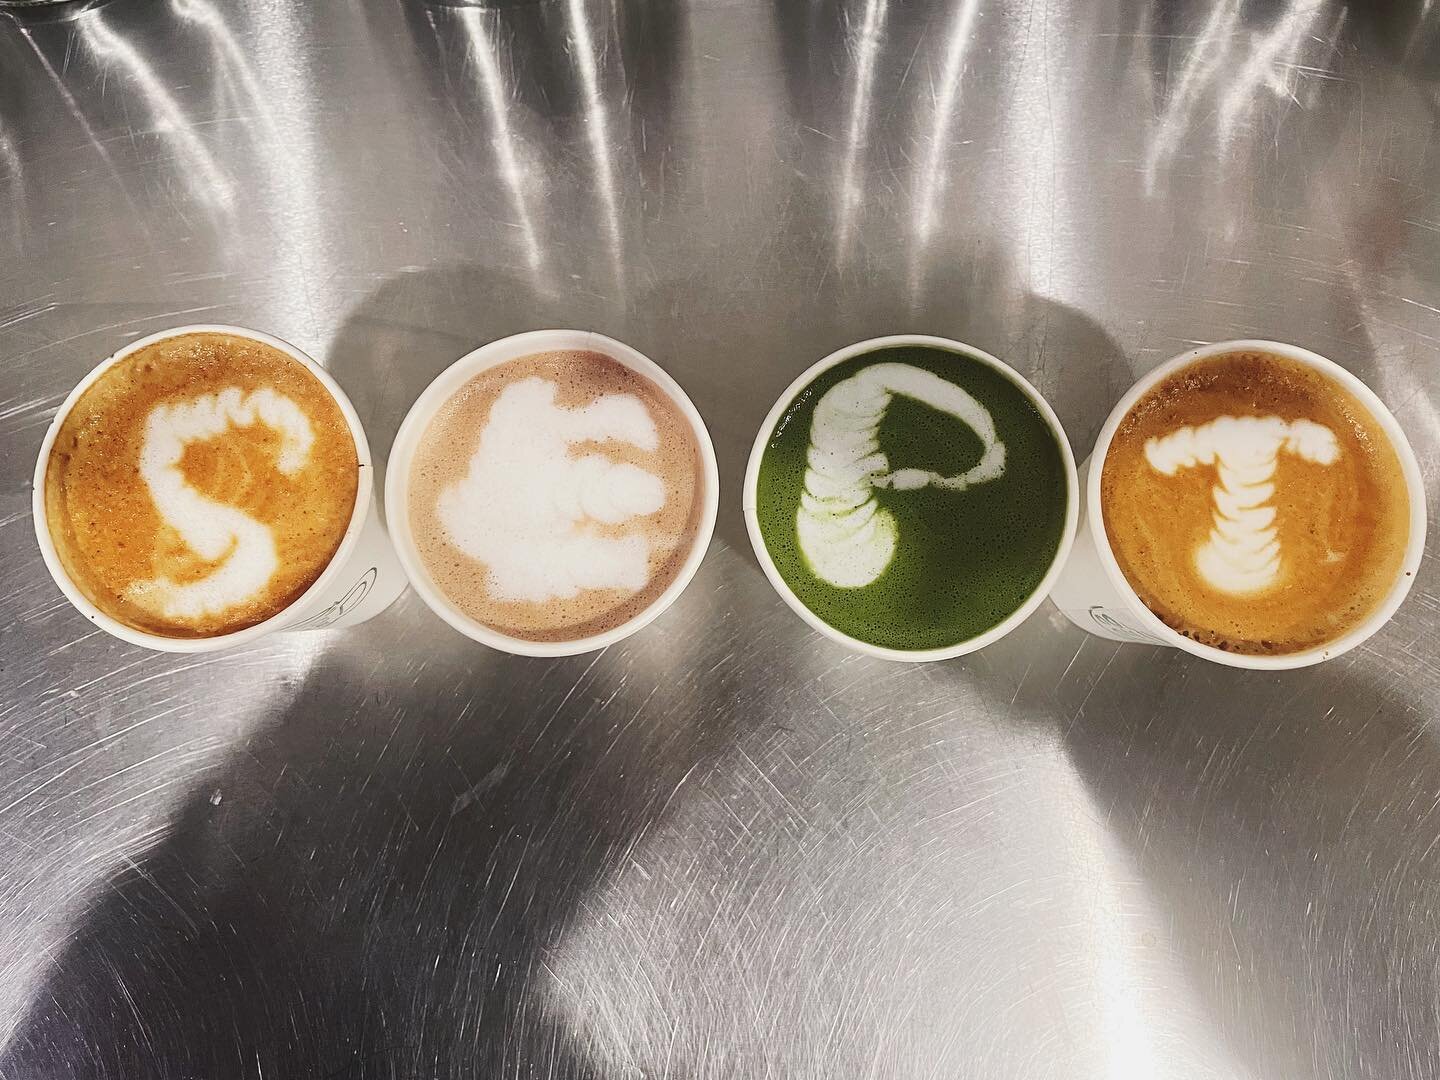 Latte art by one of our employees. We have such a talented crew here at Ozzys!
.
.
.
#caffeinated #greenpointbrooklyn #greenpointloft #ozzyscoffee